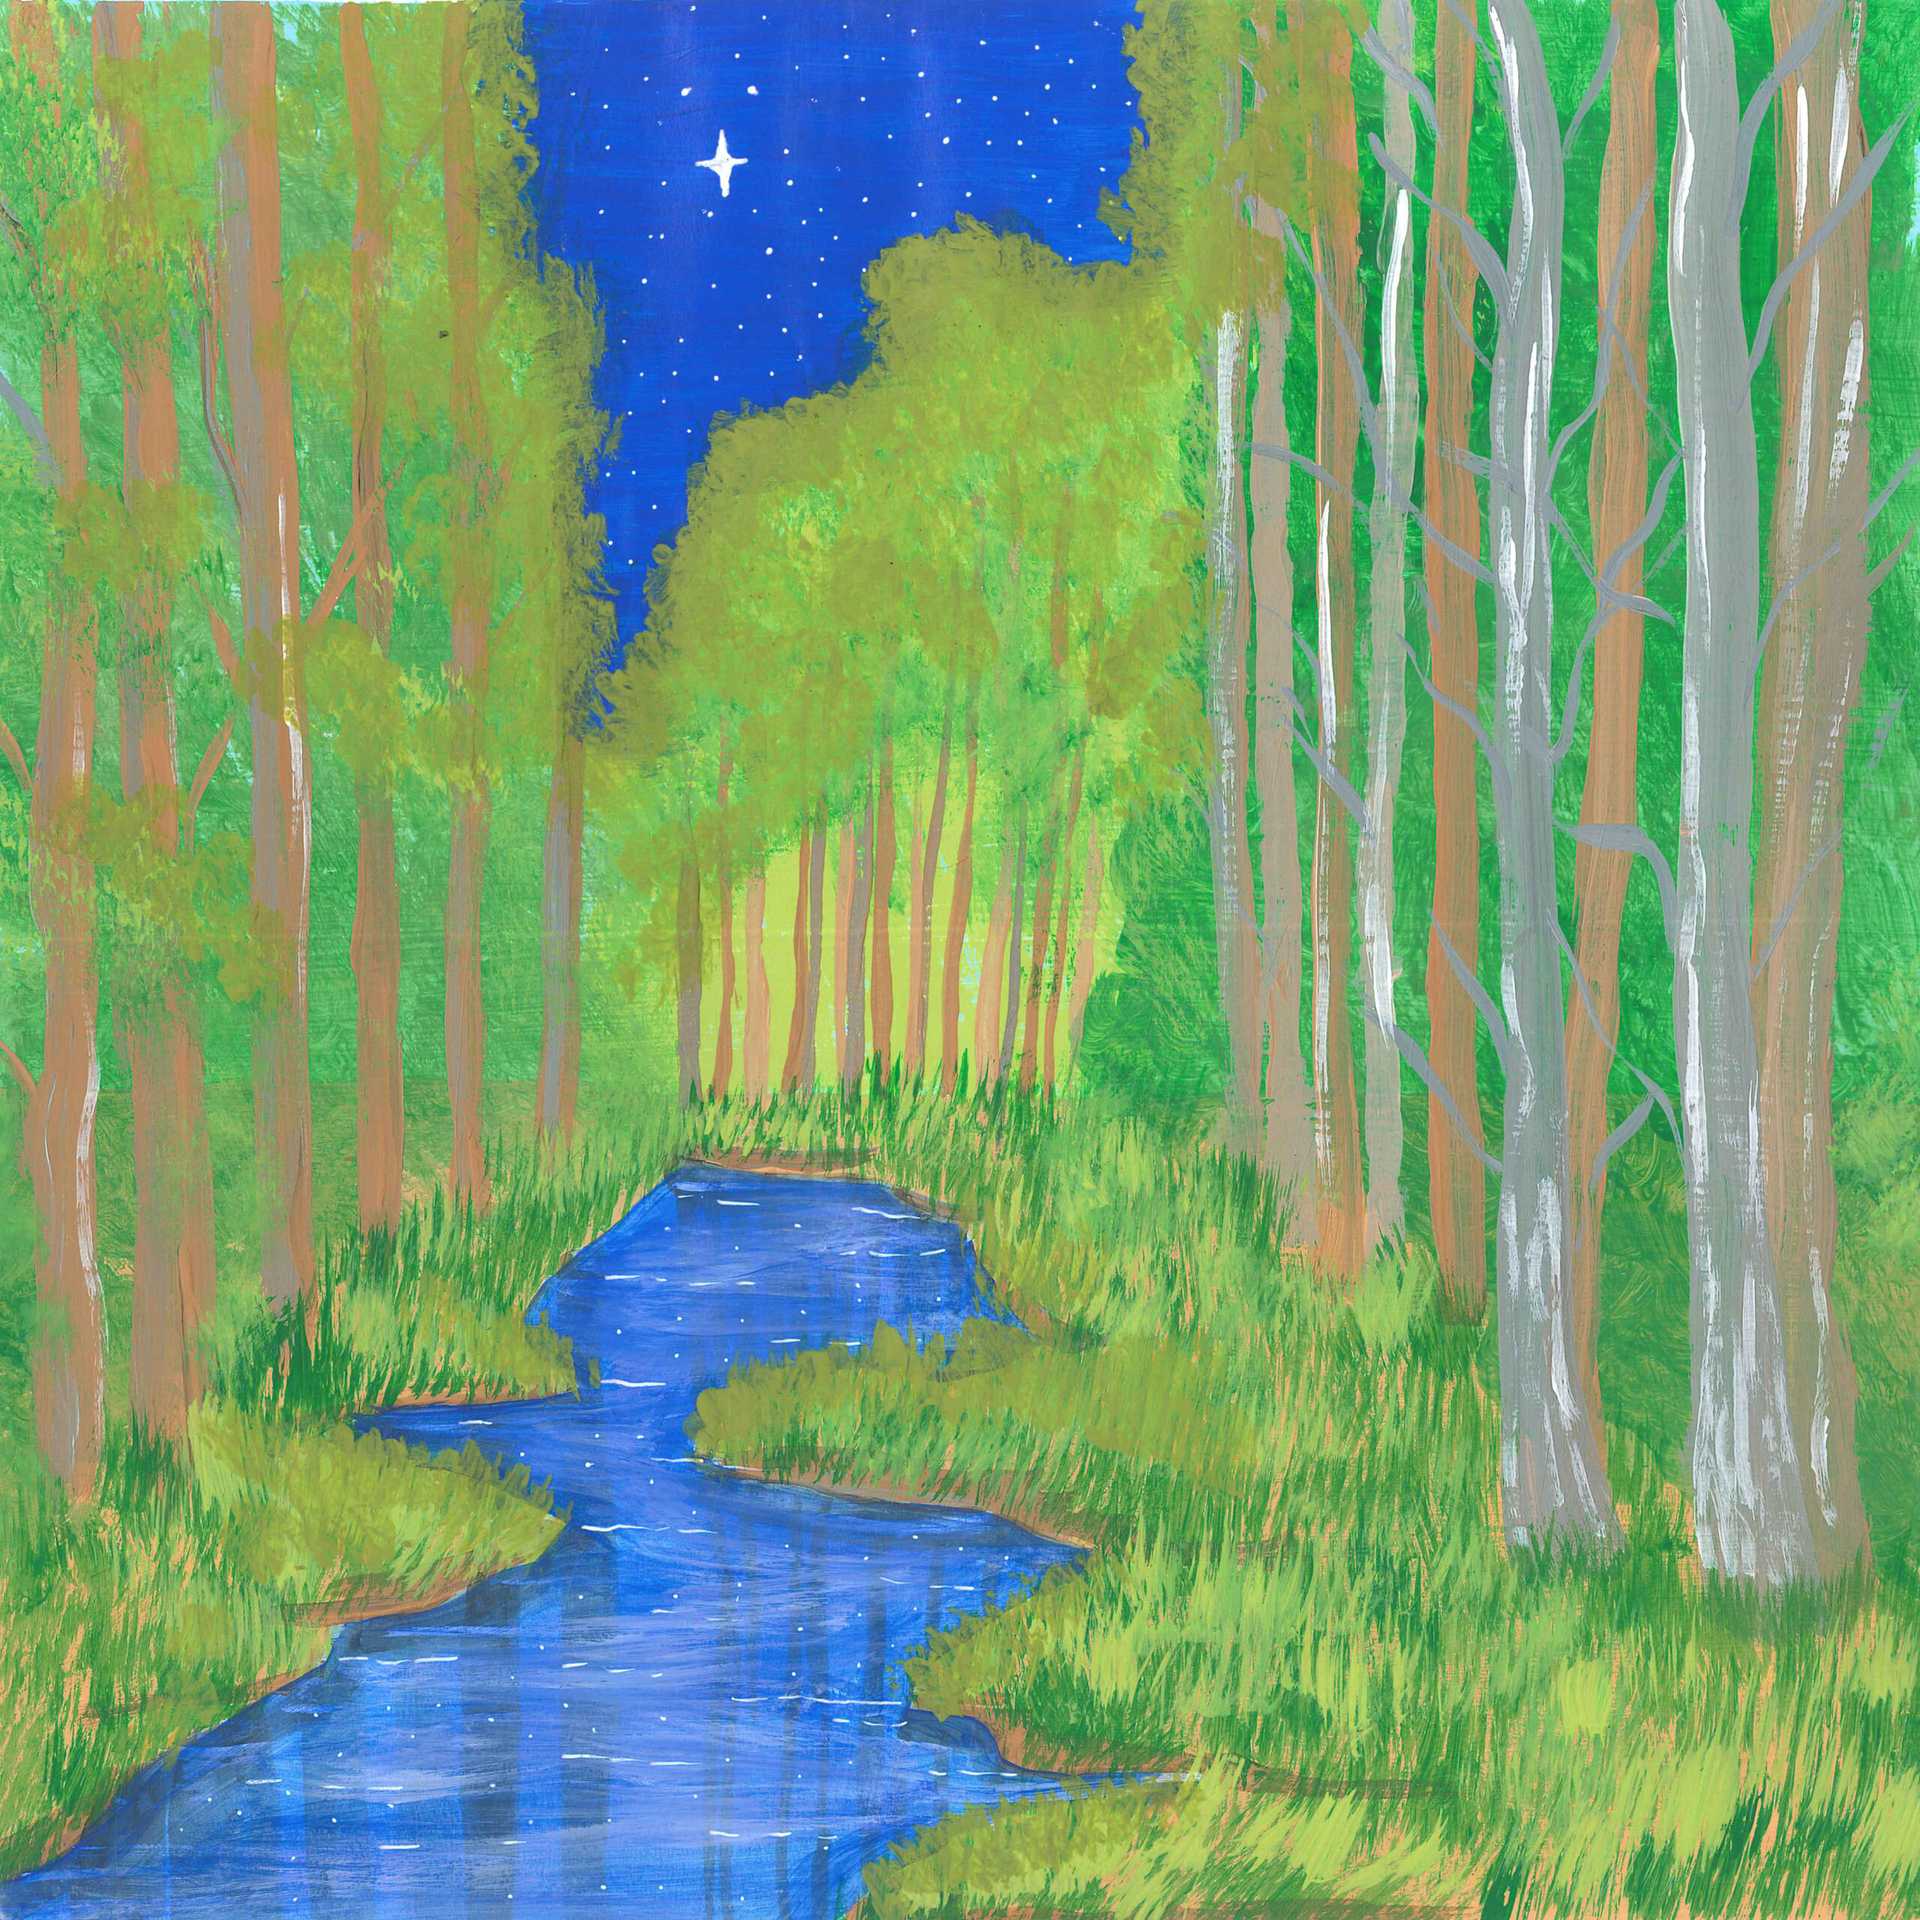 Voices of the Night in the Siberian forest - nature landscape painting - earth.fm